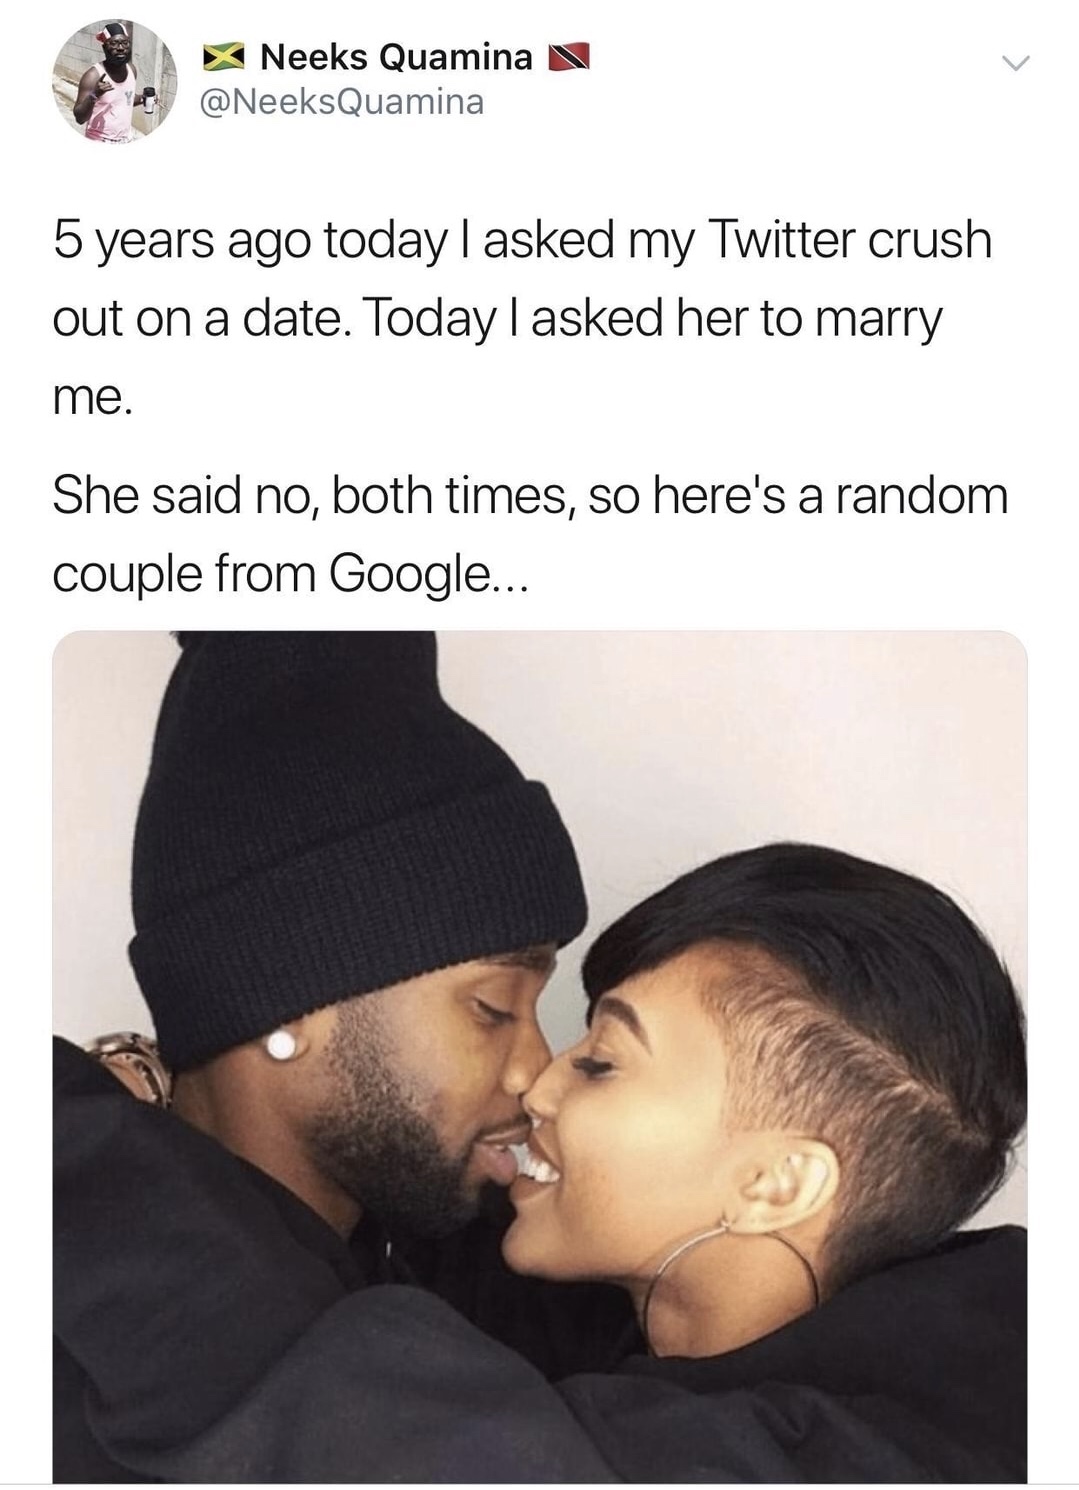 memes - black couple french kiss - Neeks Quamina N 5 years ago today I asked my Twitter crush out on a date. Today I asked her to marry me. She said no, both times, so here's a random couple from Google...